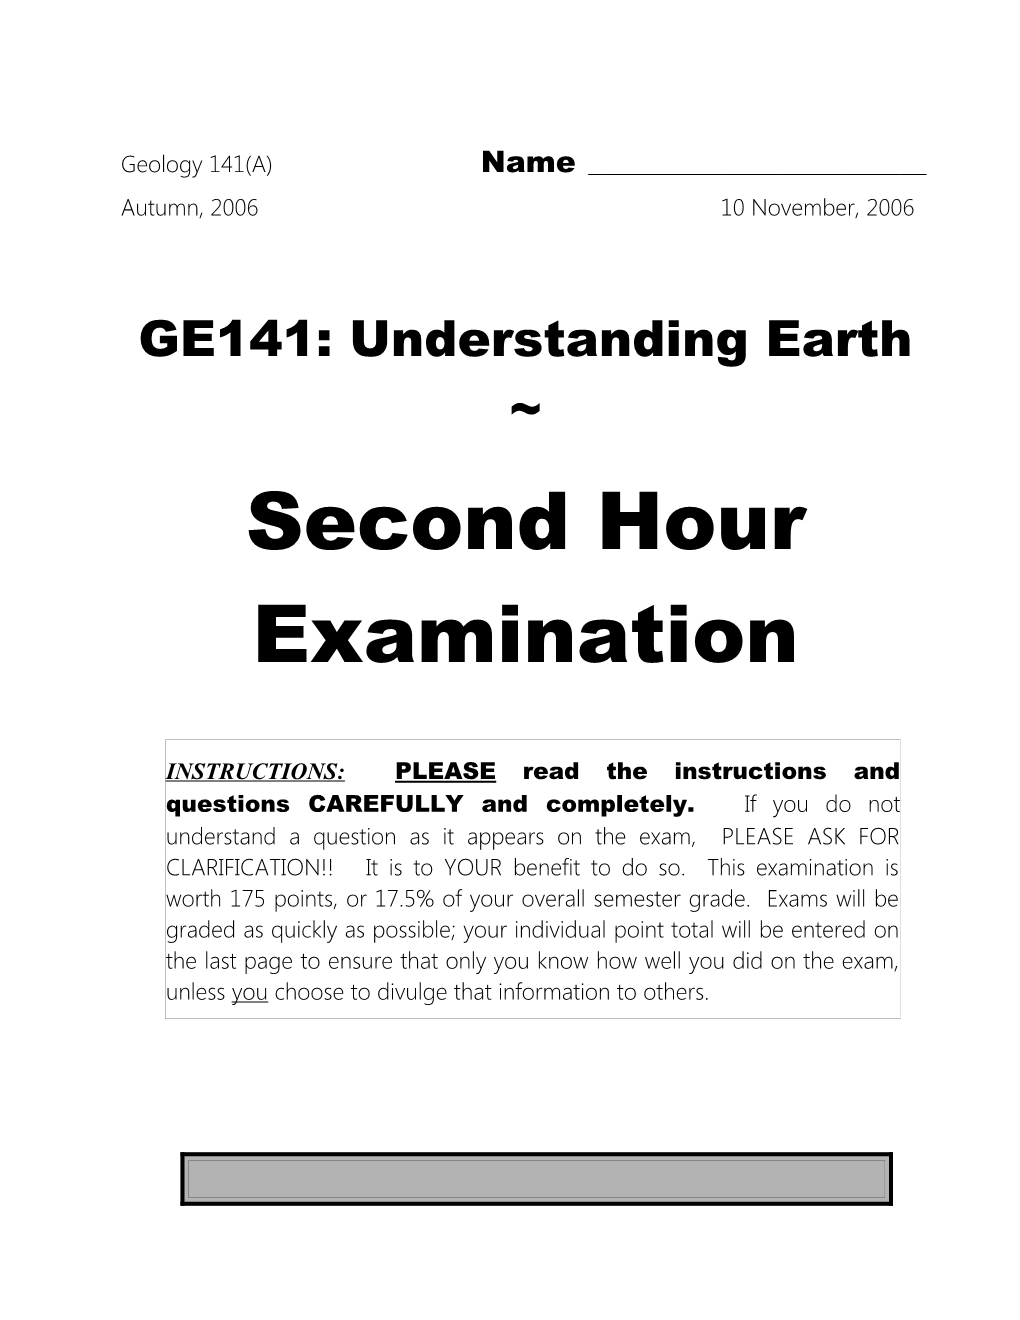 Geology 141 (A): Fall, 2006 Second Hour Examination Page 14